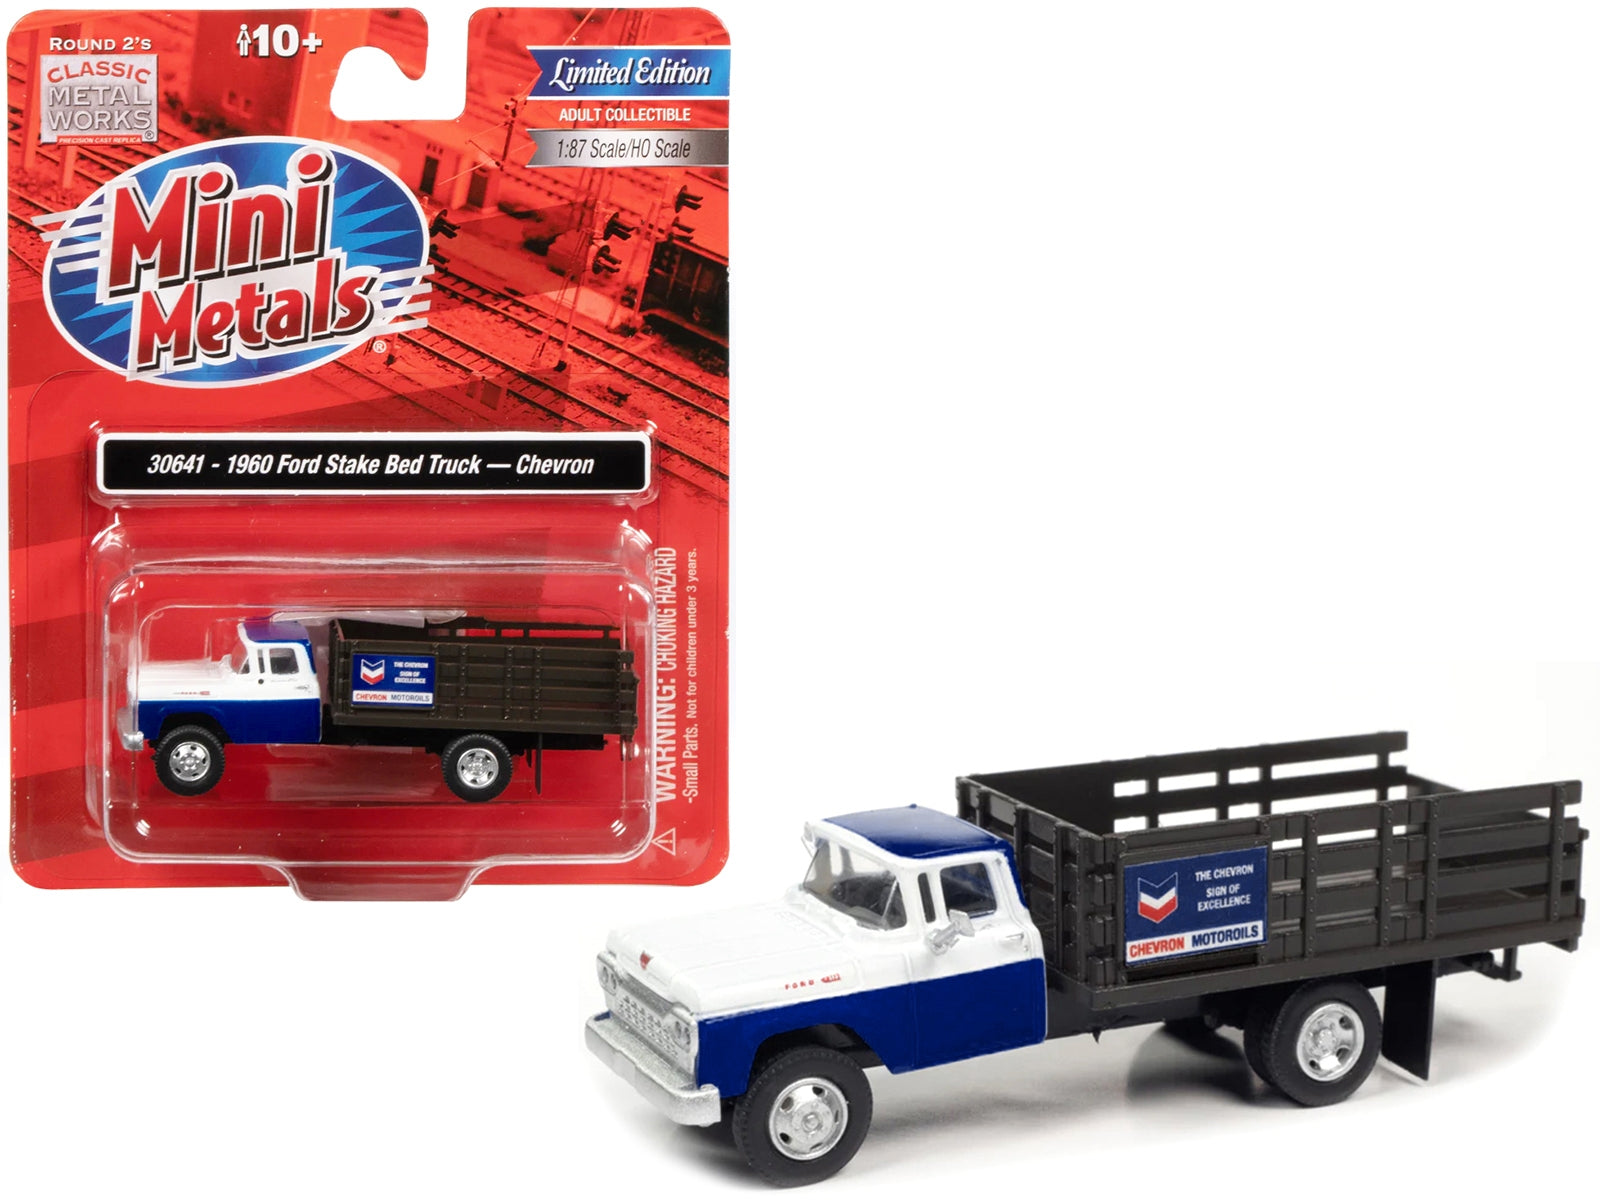 1960 Ford Stake Bed Truck "Chevron" Blue and White 1/87 (HO) Scale Model Car by Classic Metal Works Classic Metal Works